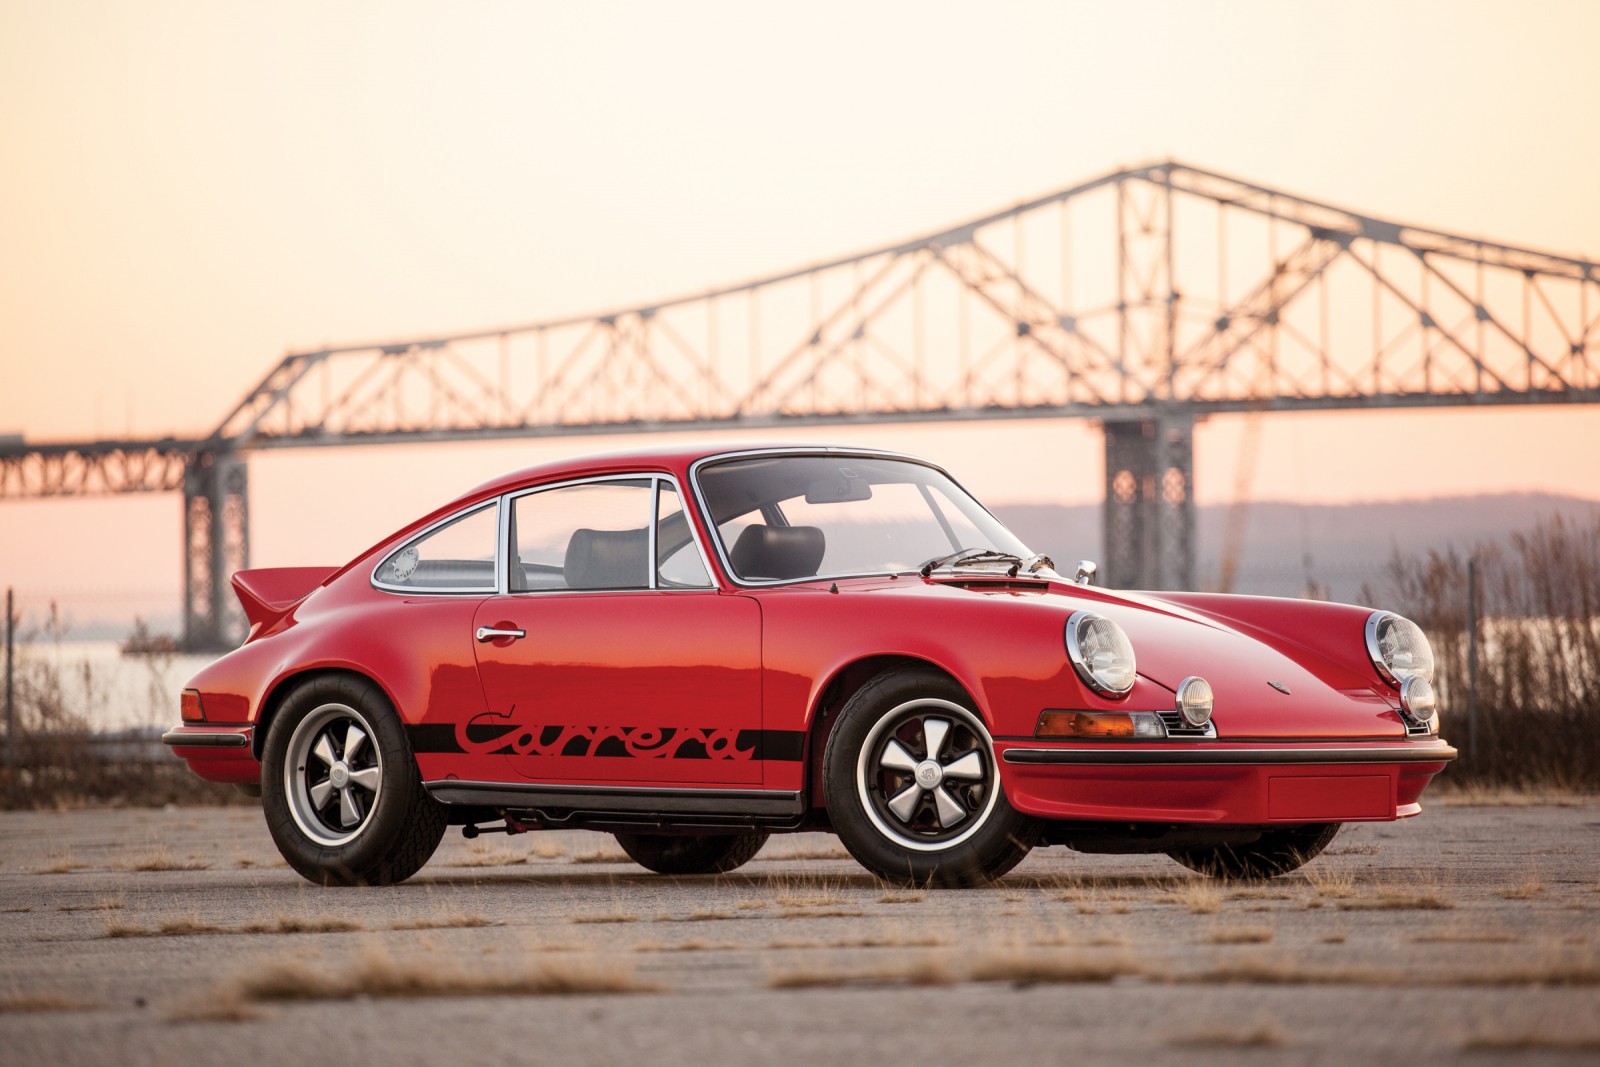 Amazing Porsche 911 Carrera RS Pictures & Backgrounds